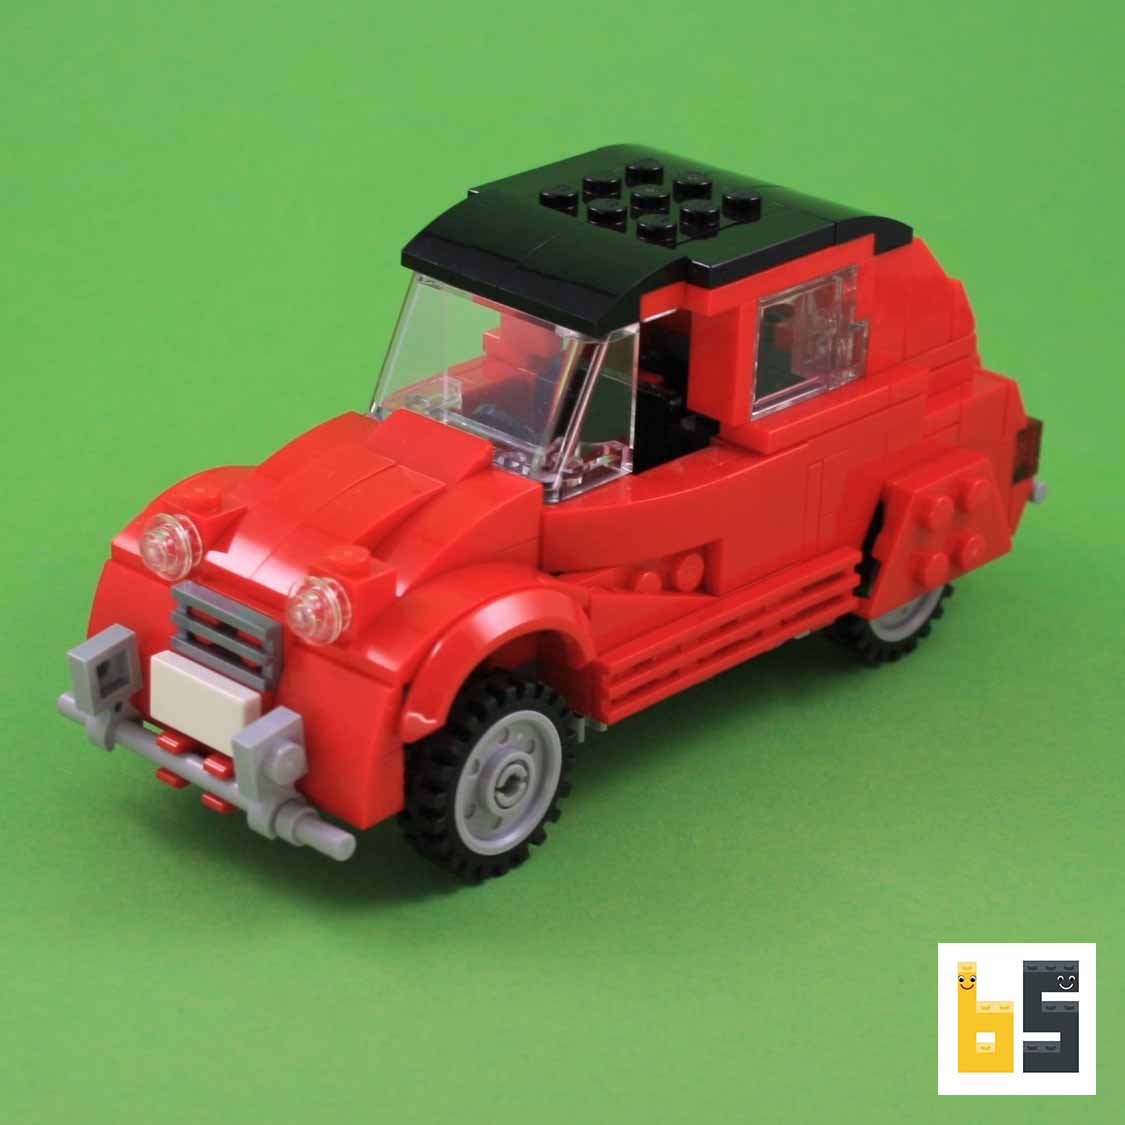 You are currently viewing Citroën 2CV in red